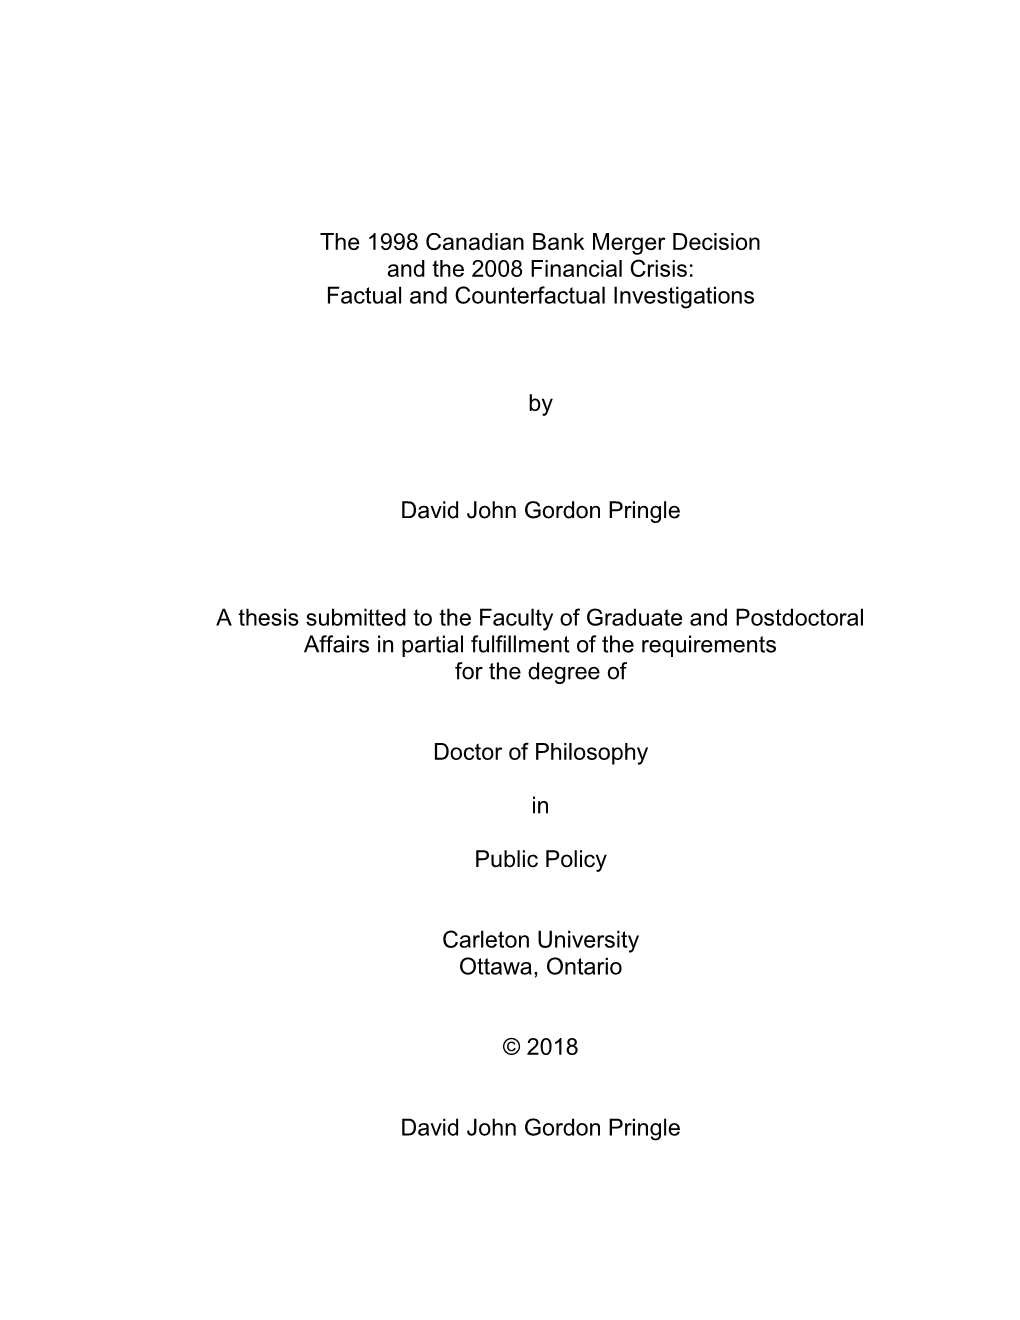 The 1998 Canadian Bank Merger Decision and the 2008 Financial Crisis: Factual and Counterfactual Investigations by David John G